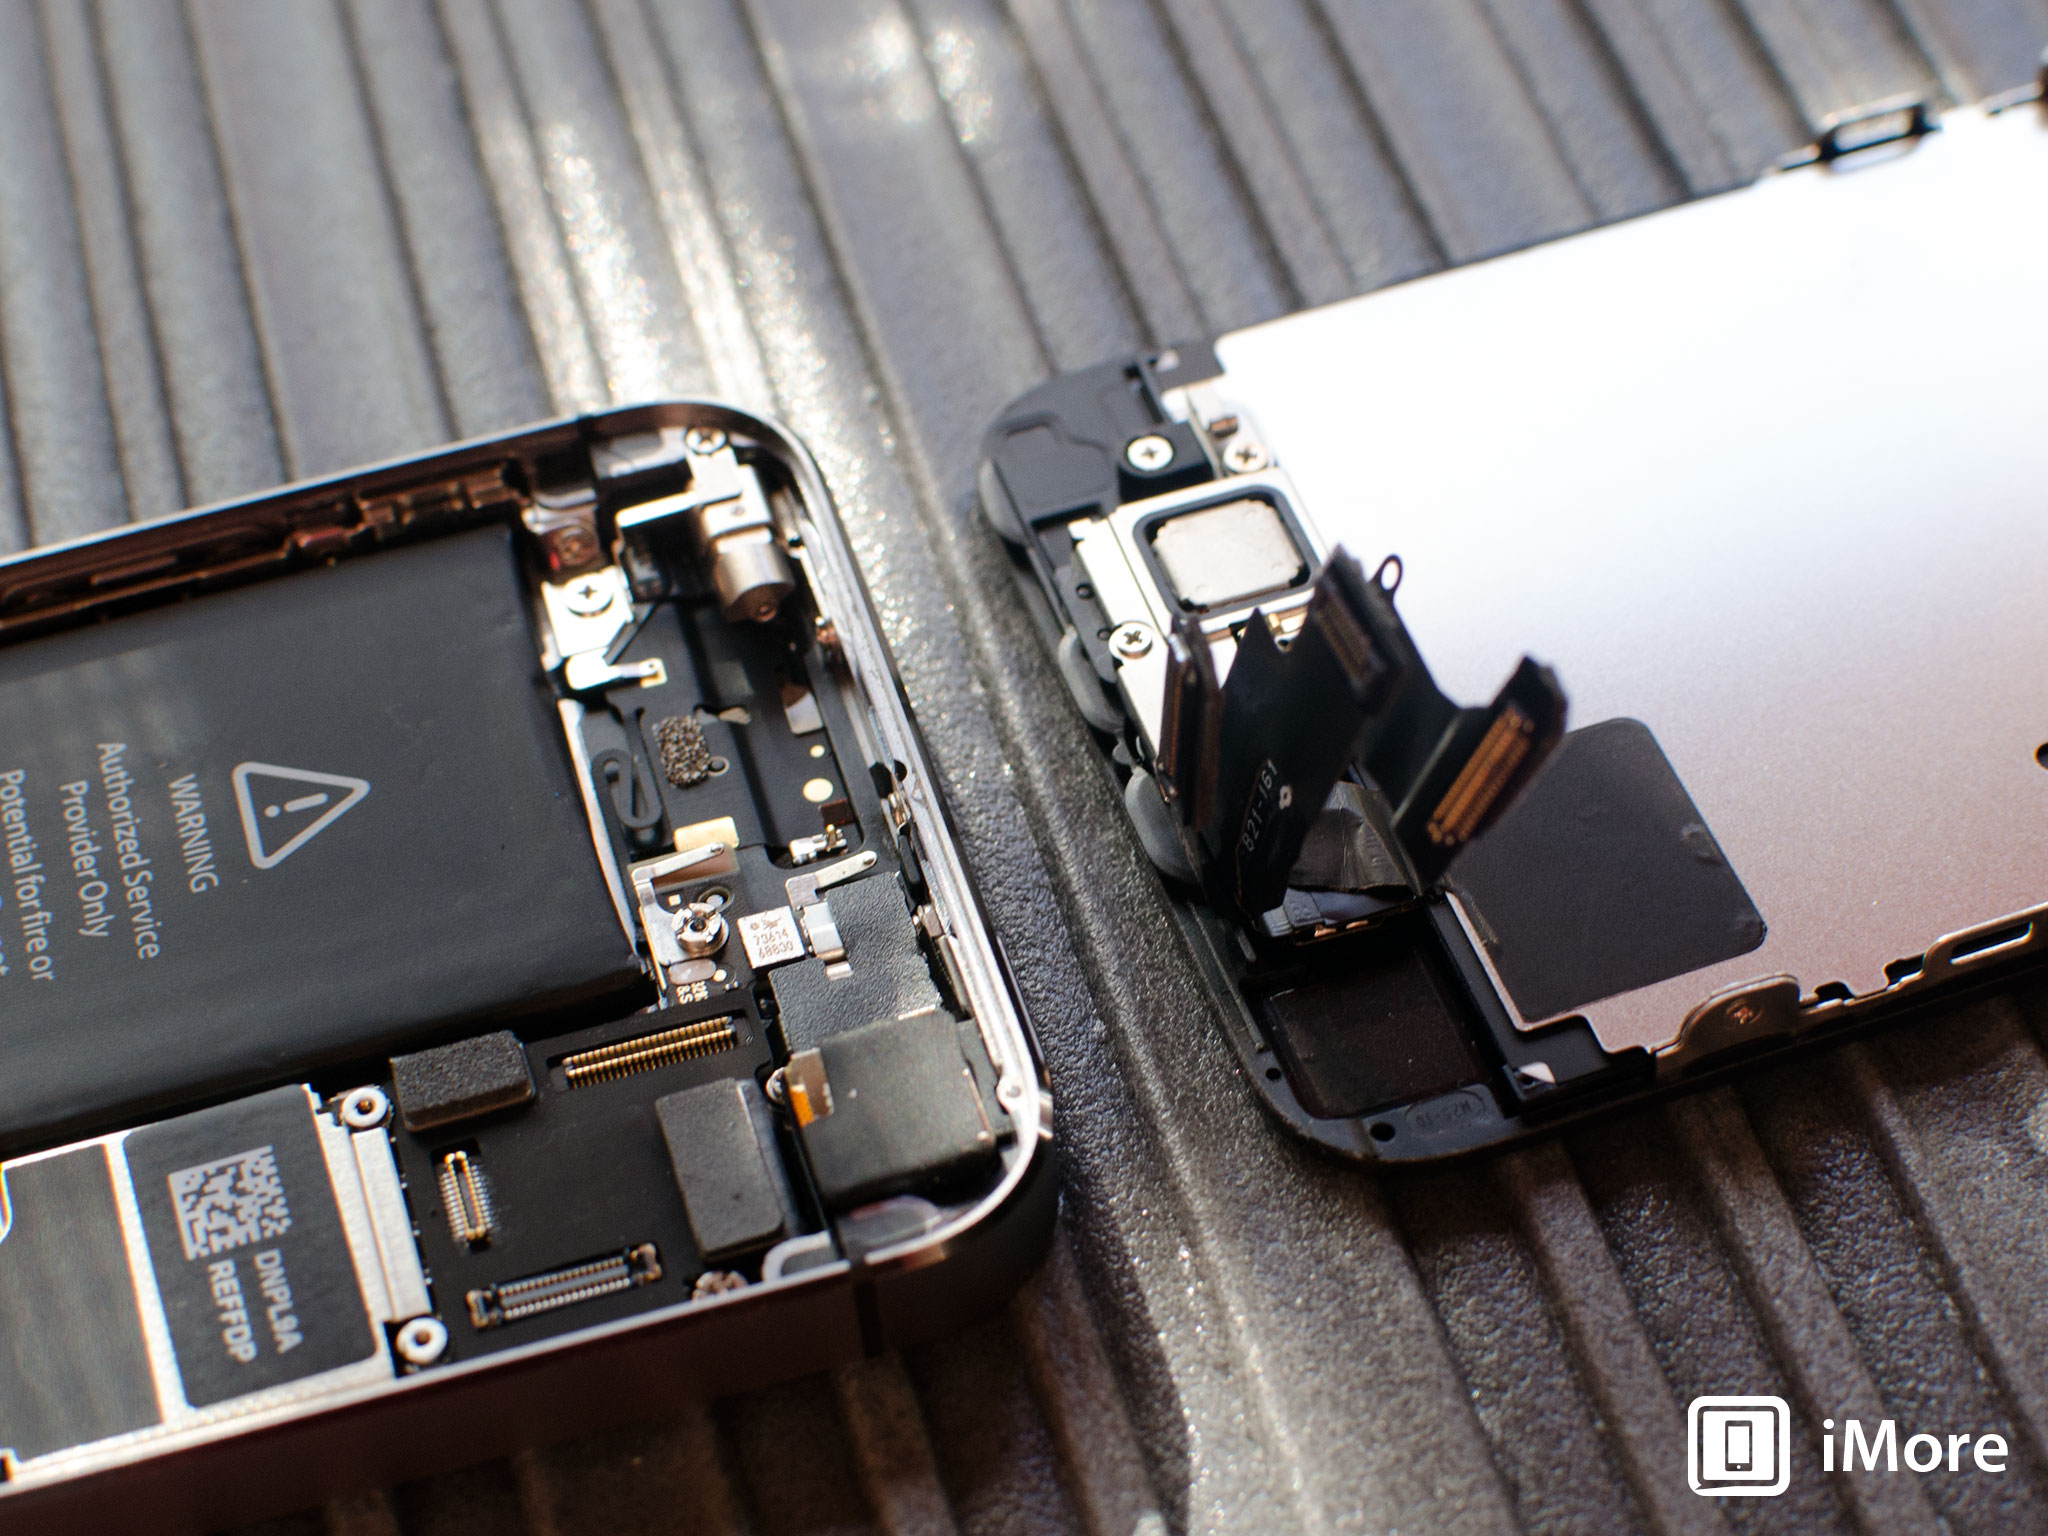 How to replace a broken screen on an iPhone 5s